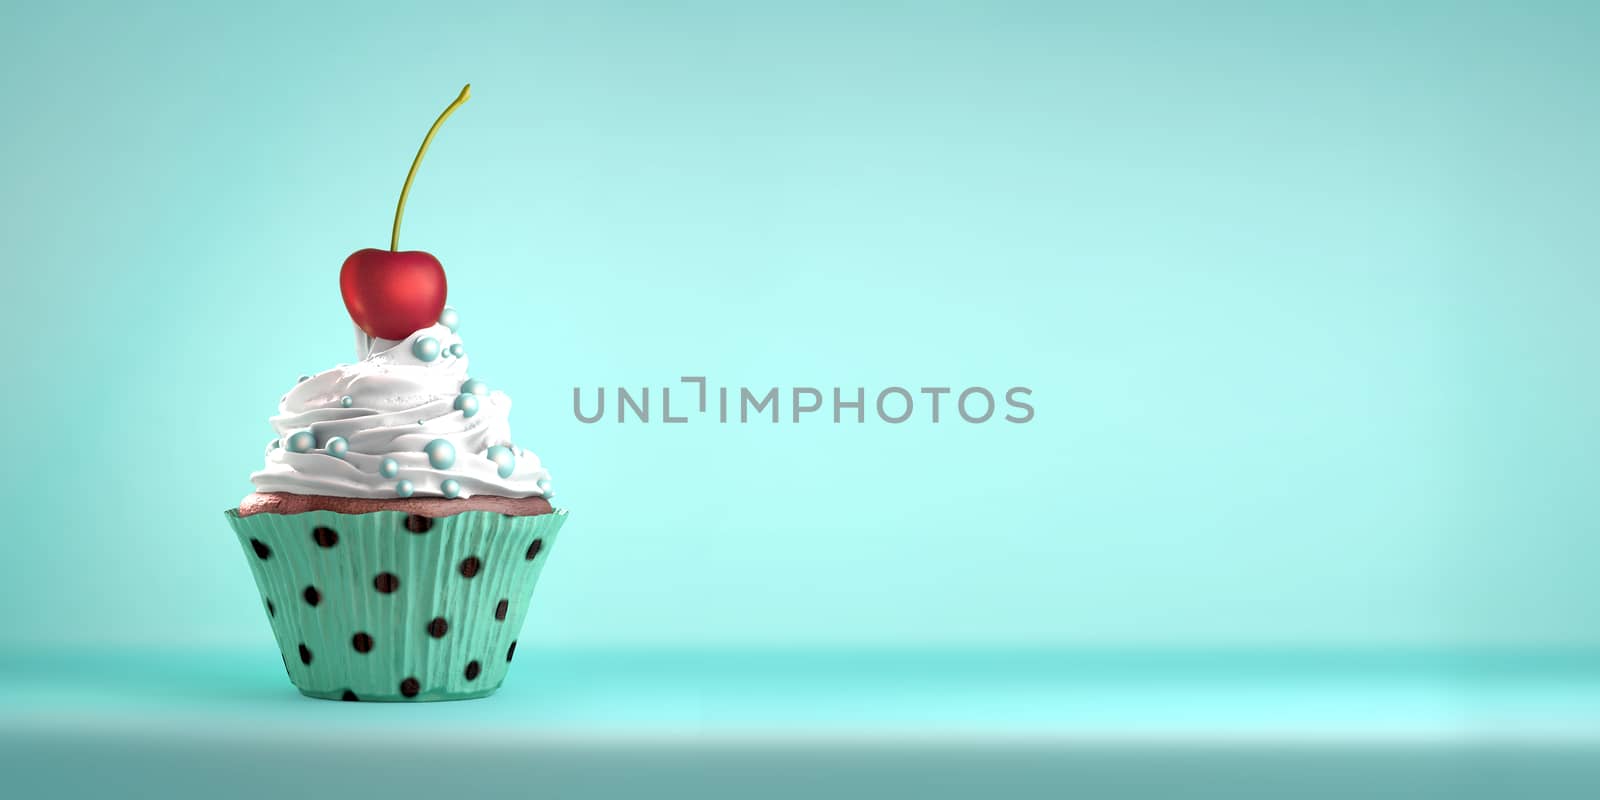 Delicious cupcake topped with a cherry with whipped cream and sweeties. The cherry on the cake metaphor. Copy space.